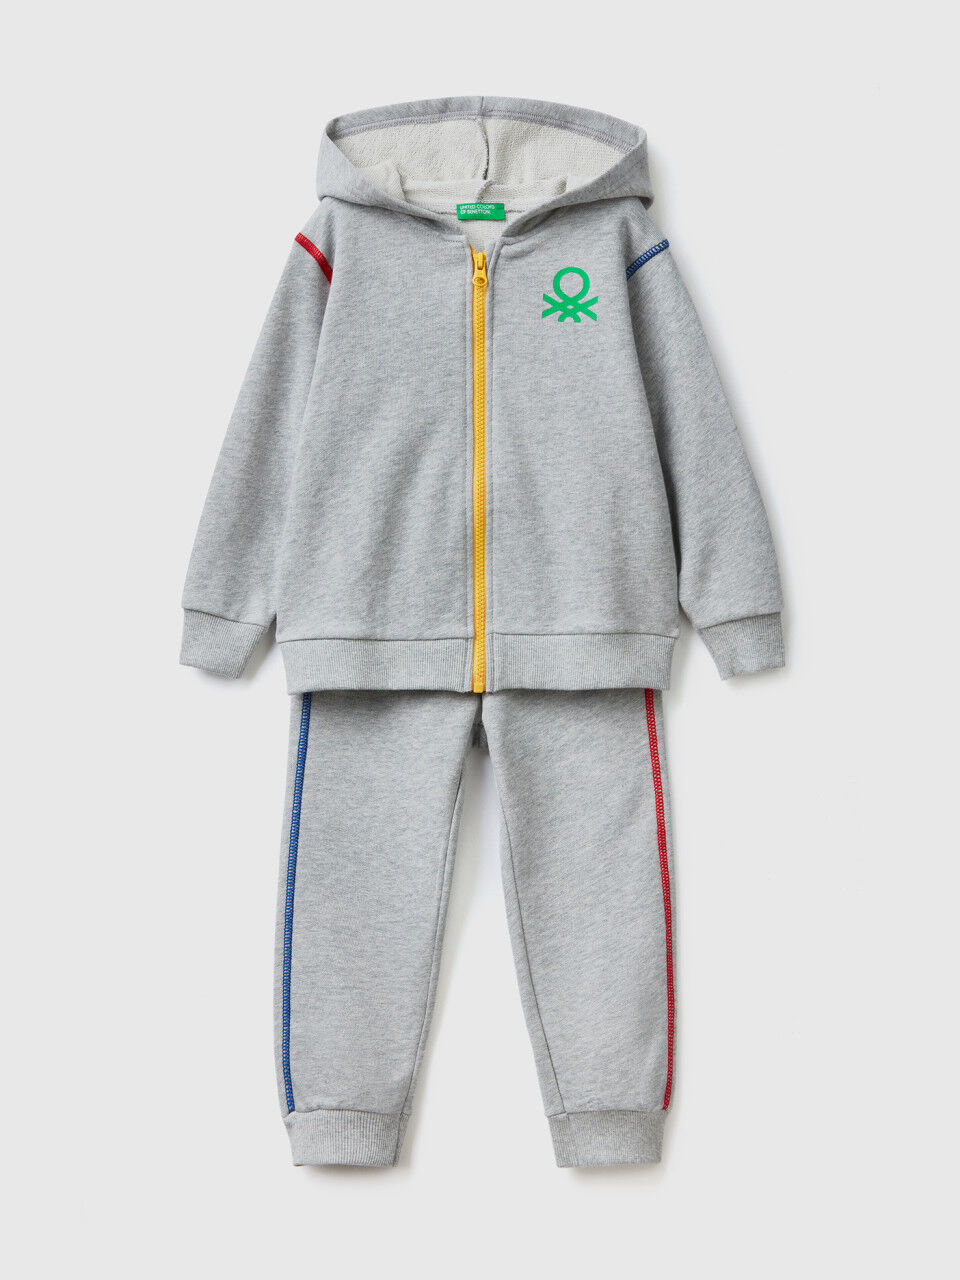 Sweat tracksuit in 100% cotton